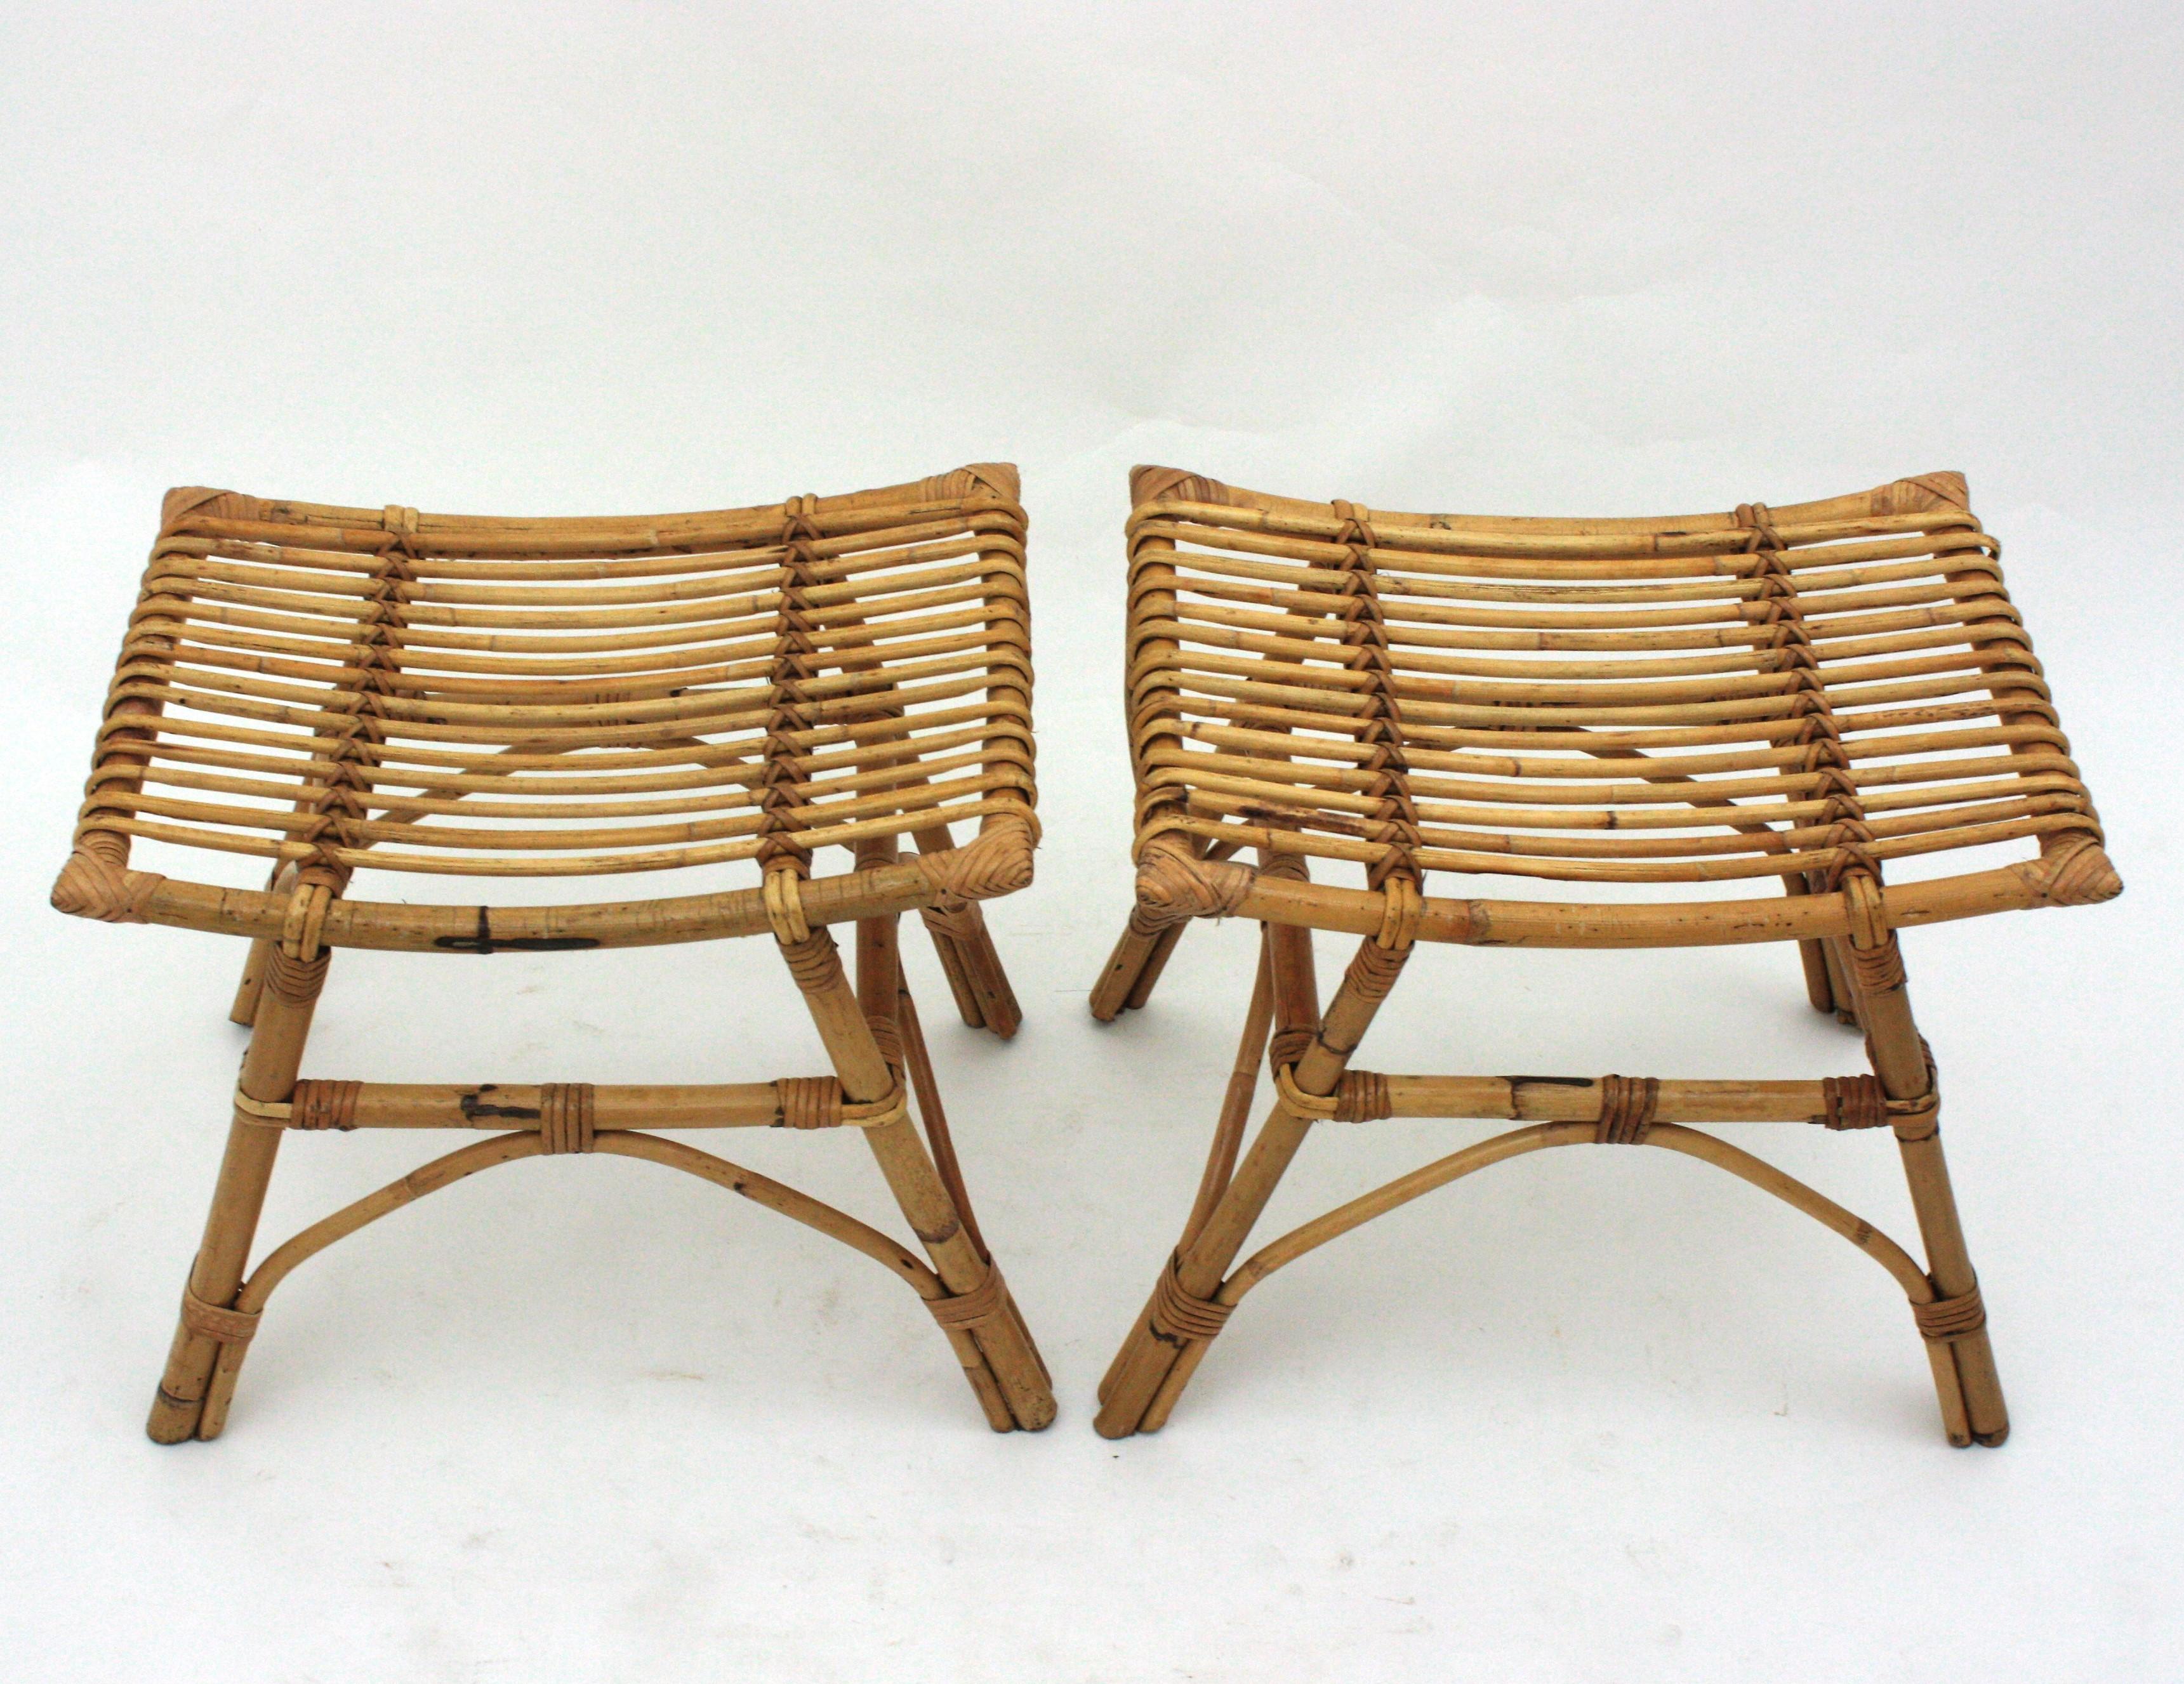 Pair of Bamboo Rattan Stools or Side Tables, 1960s For Sale 3